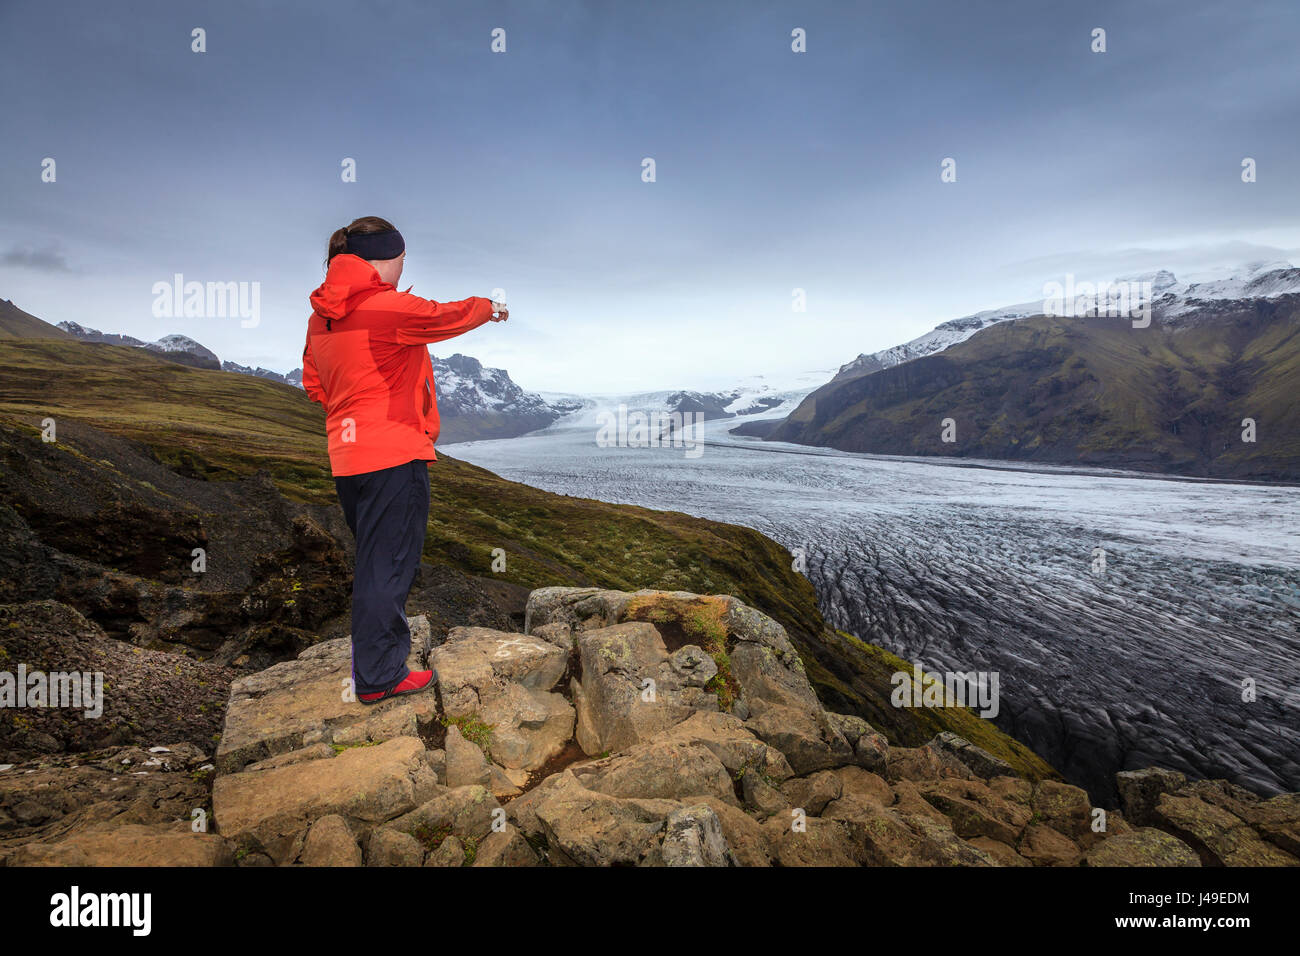 A hiker admiring view of Fjallsarlon glacier in Southern Iceland Stock Photo